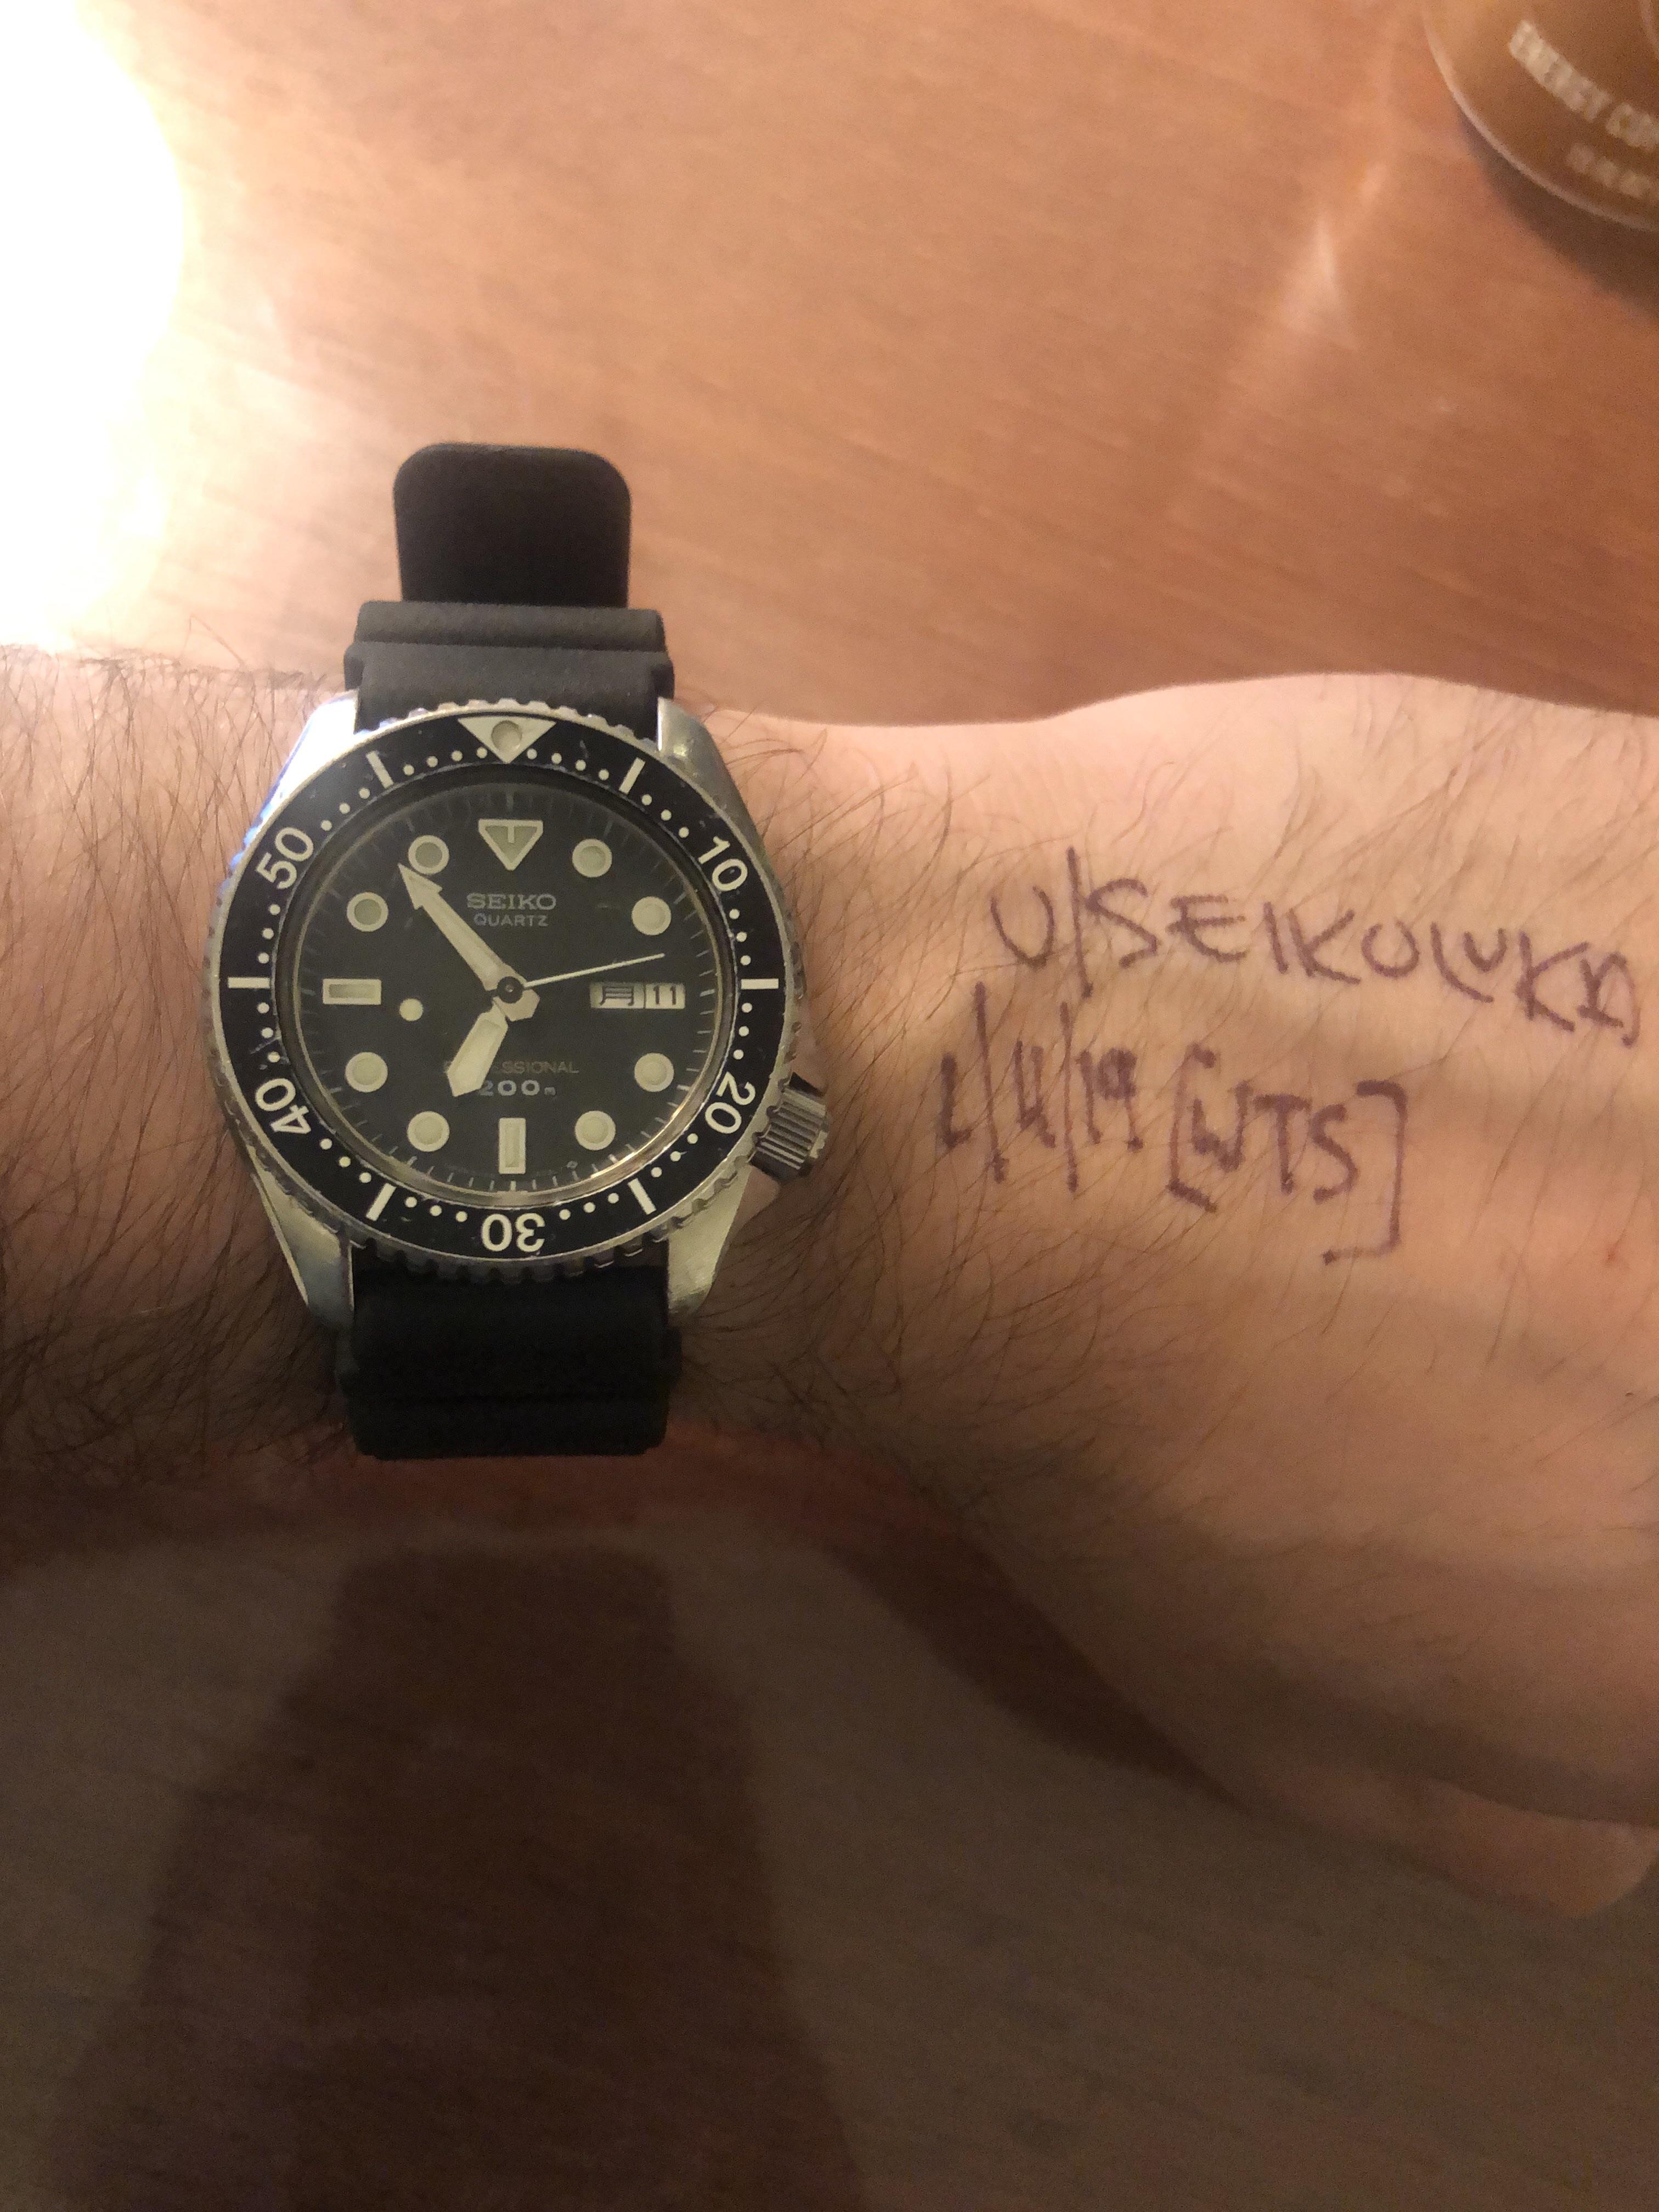 WTS] Seiko 6458-6020 “Baby Beater” [$165] | WatchCharts